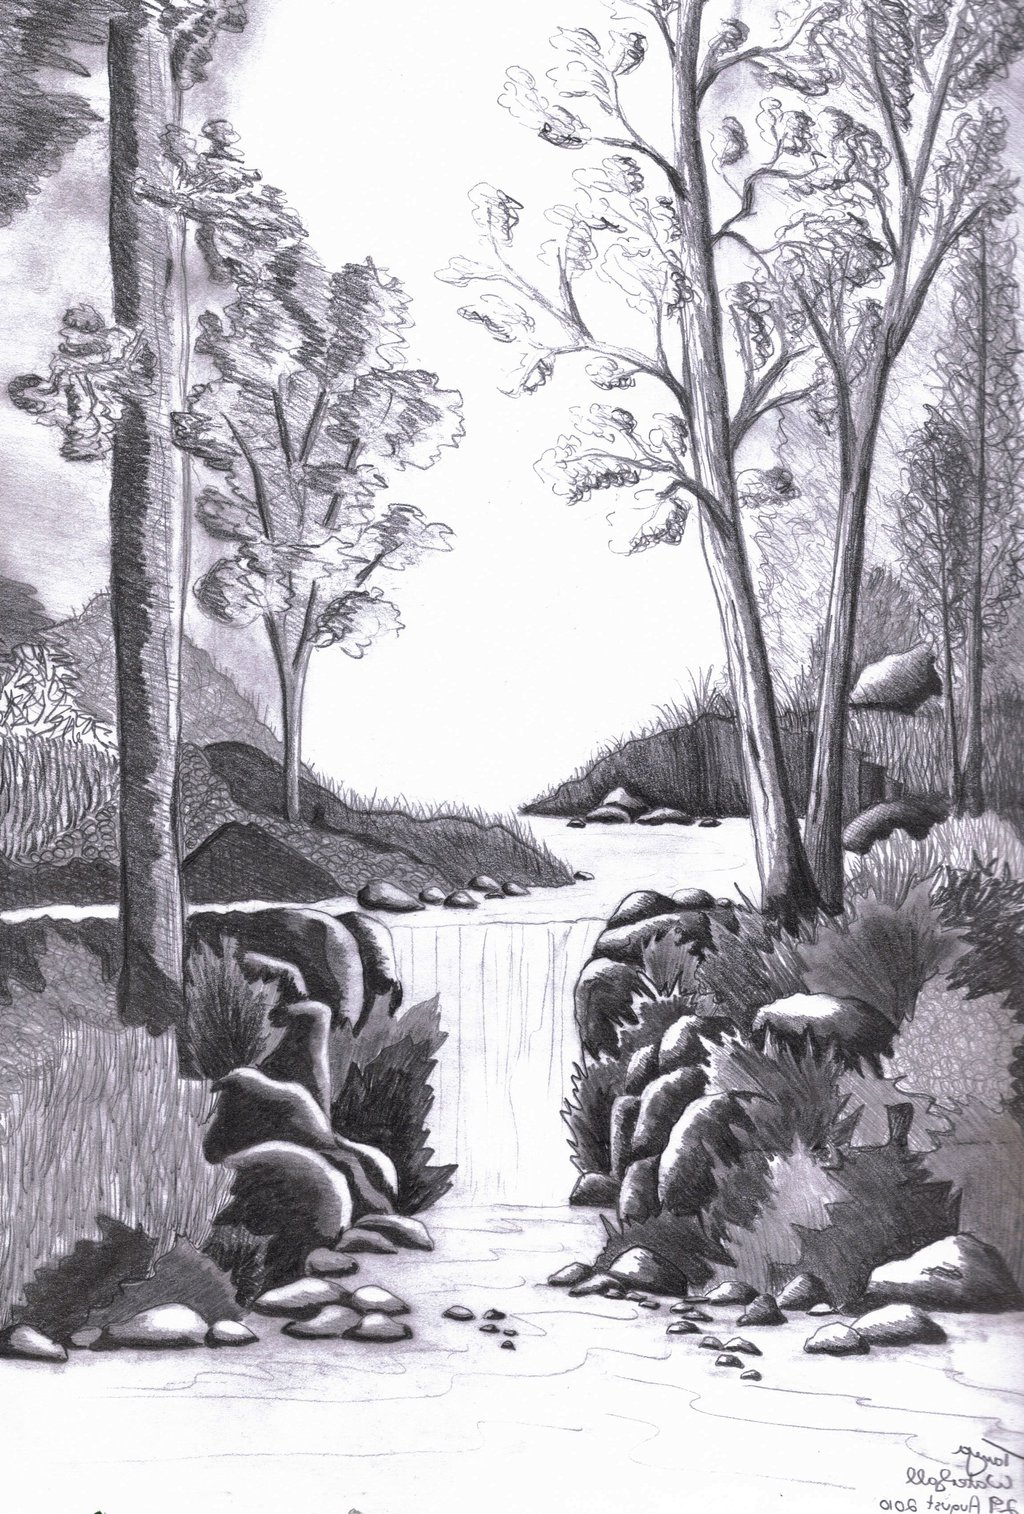 Waterfall Pencil Drawing at PaintingValley.com | Explore collection of